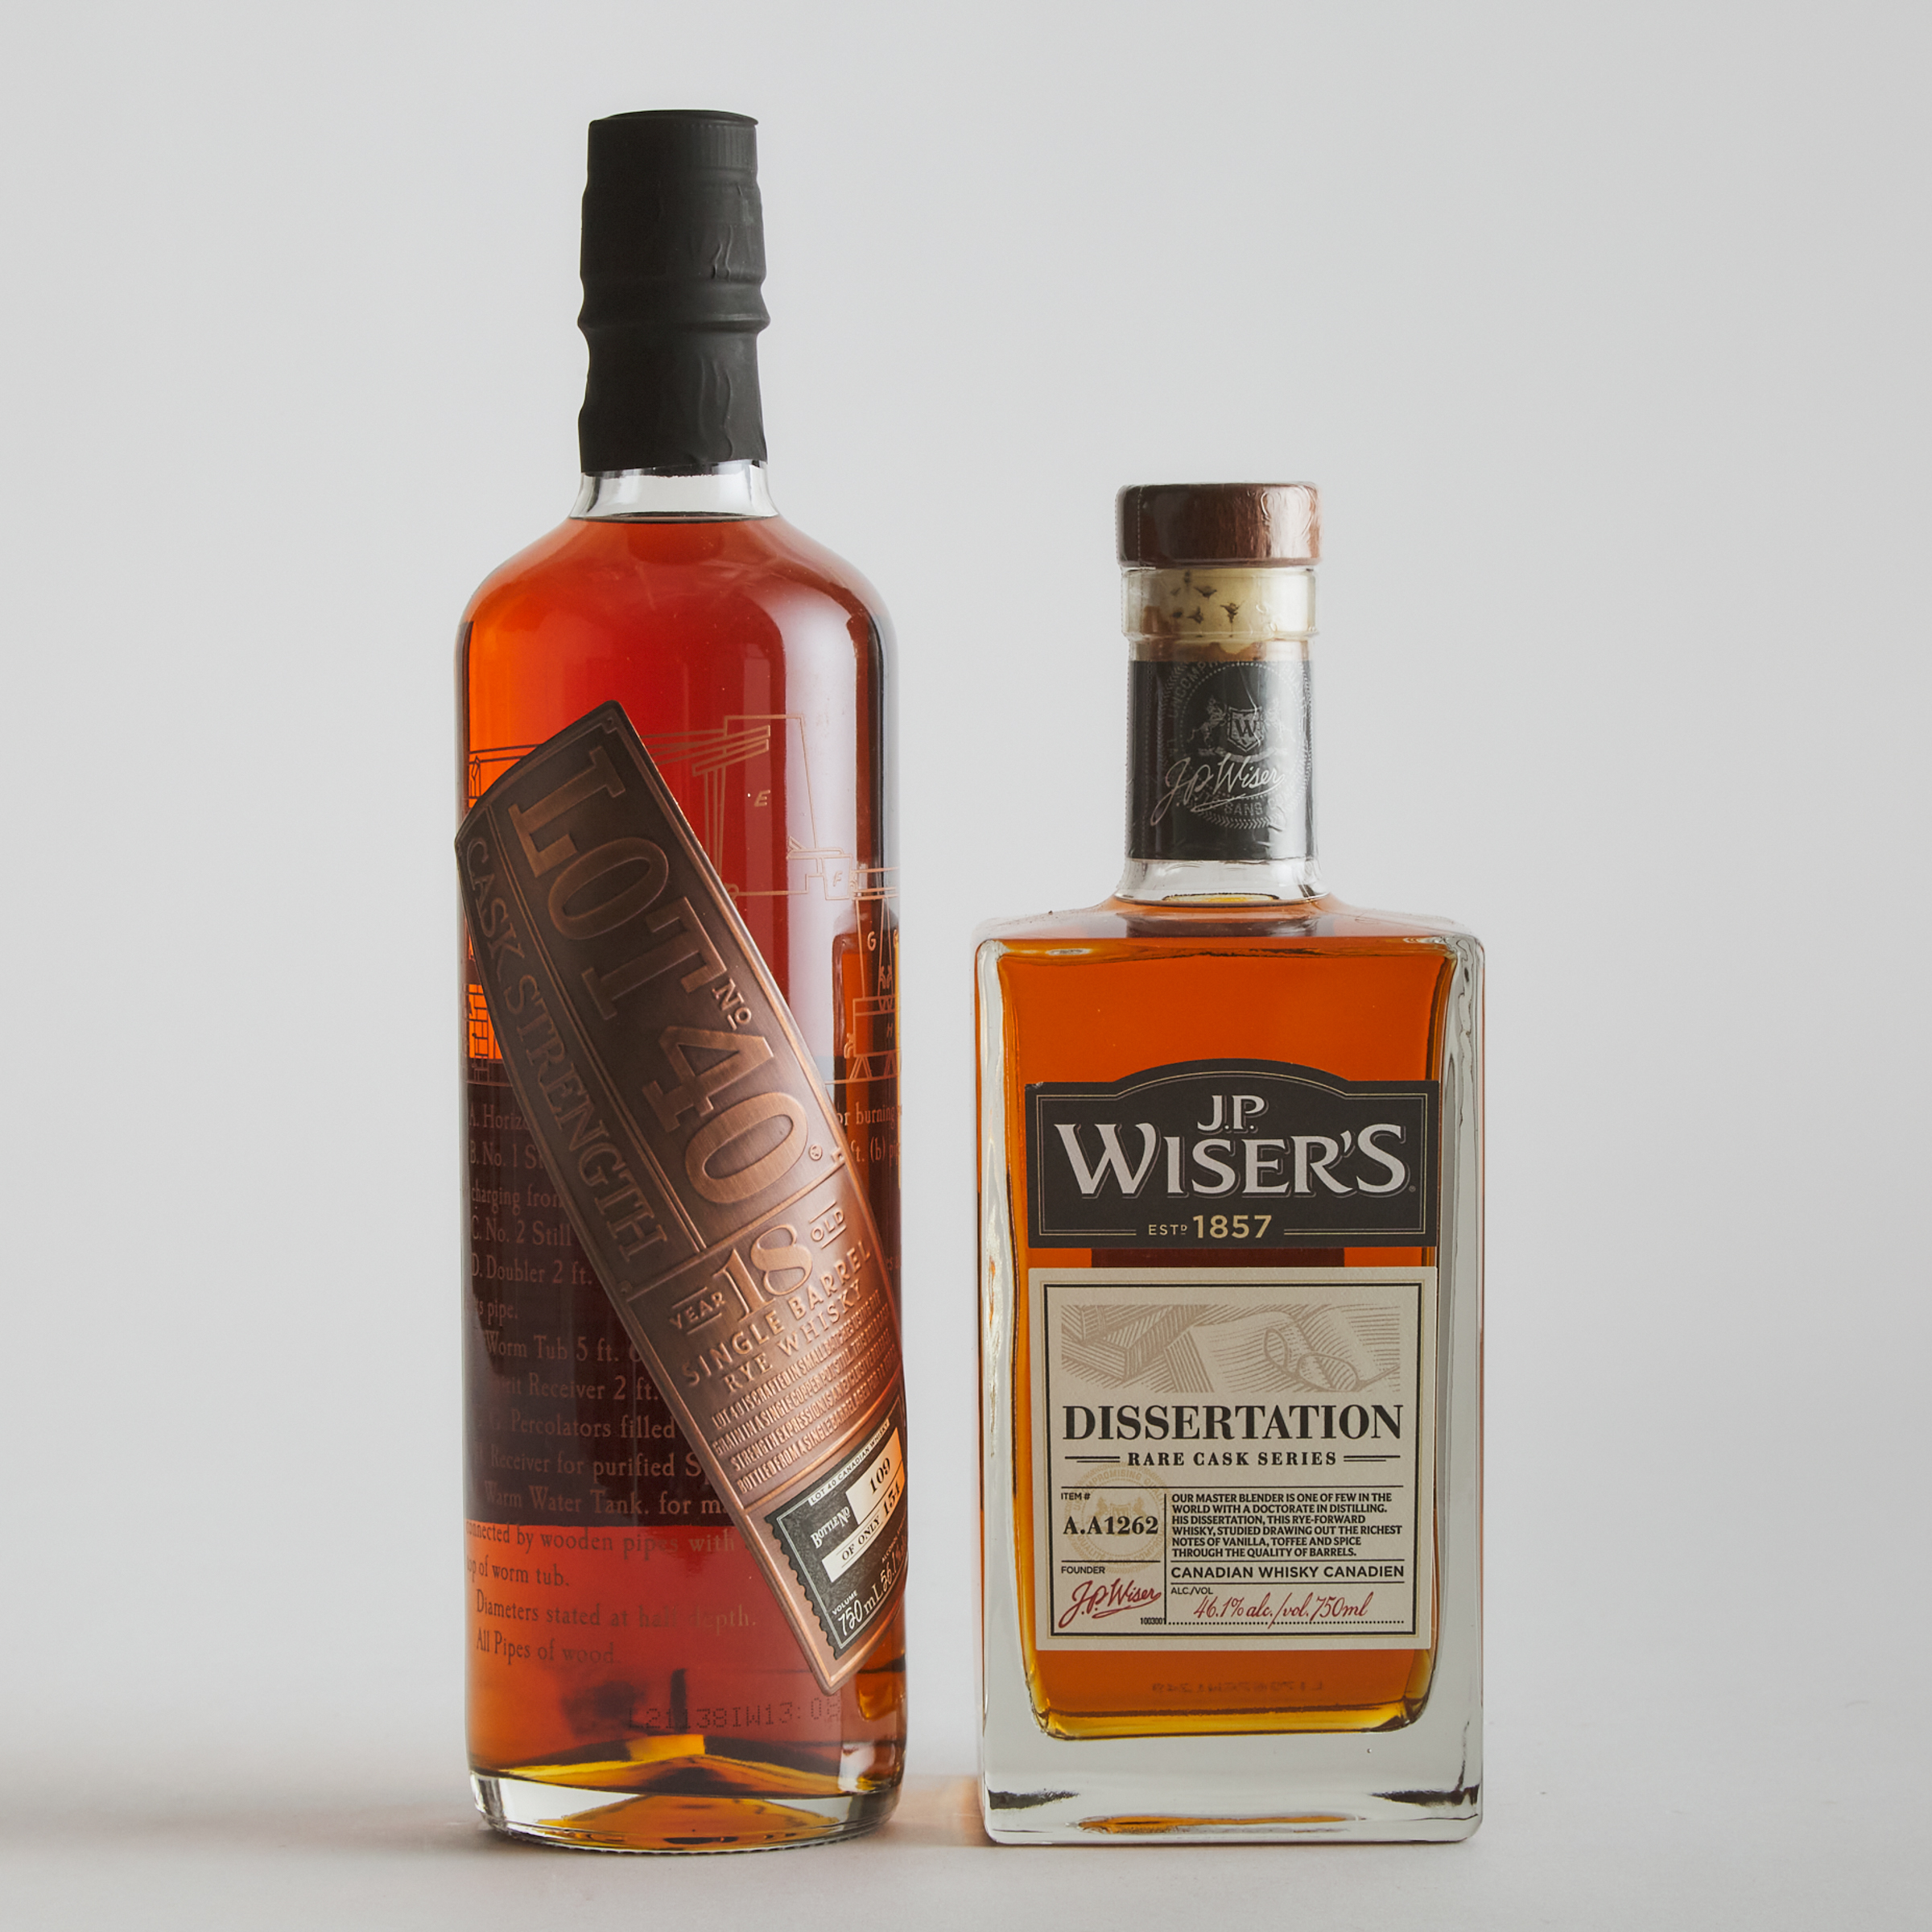 18 YEARS LOT 40 CASK STRENGTH SINGLE BARREL RYE WHISKY (ONE 750 ML)J.P. WISER'S CANADIAN WHISKY DISSERTATION: RARE CASK SERIES (ONE 750 ML)